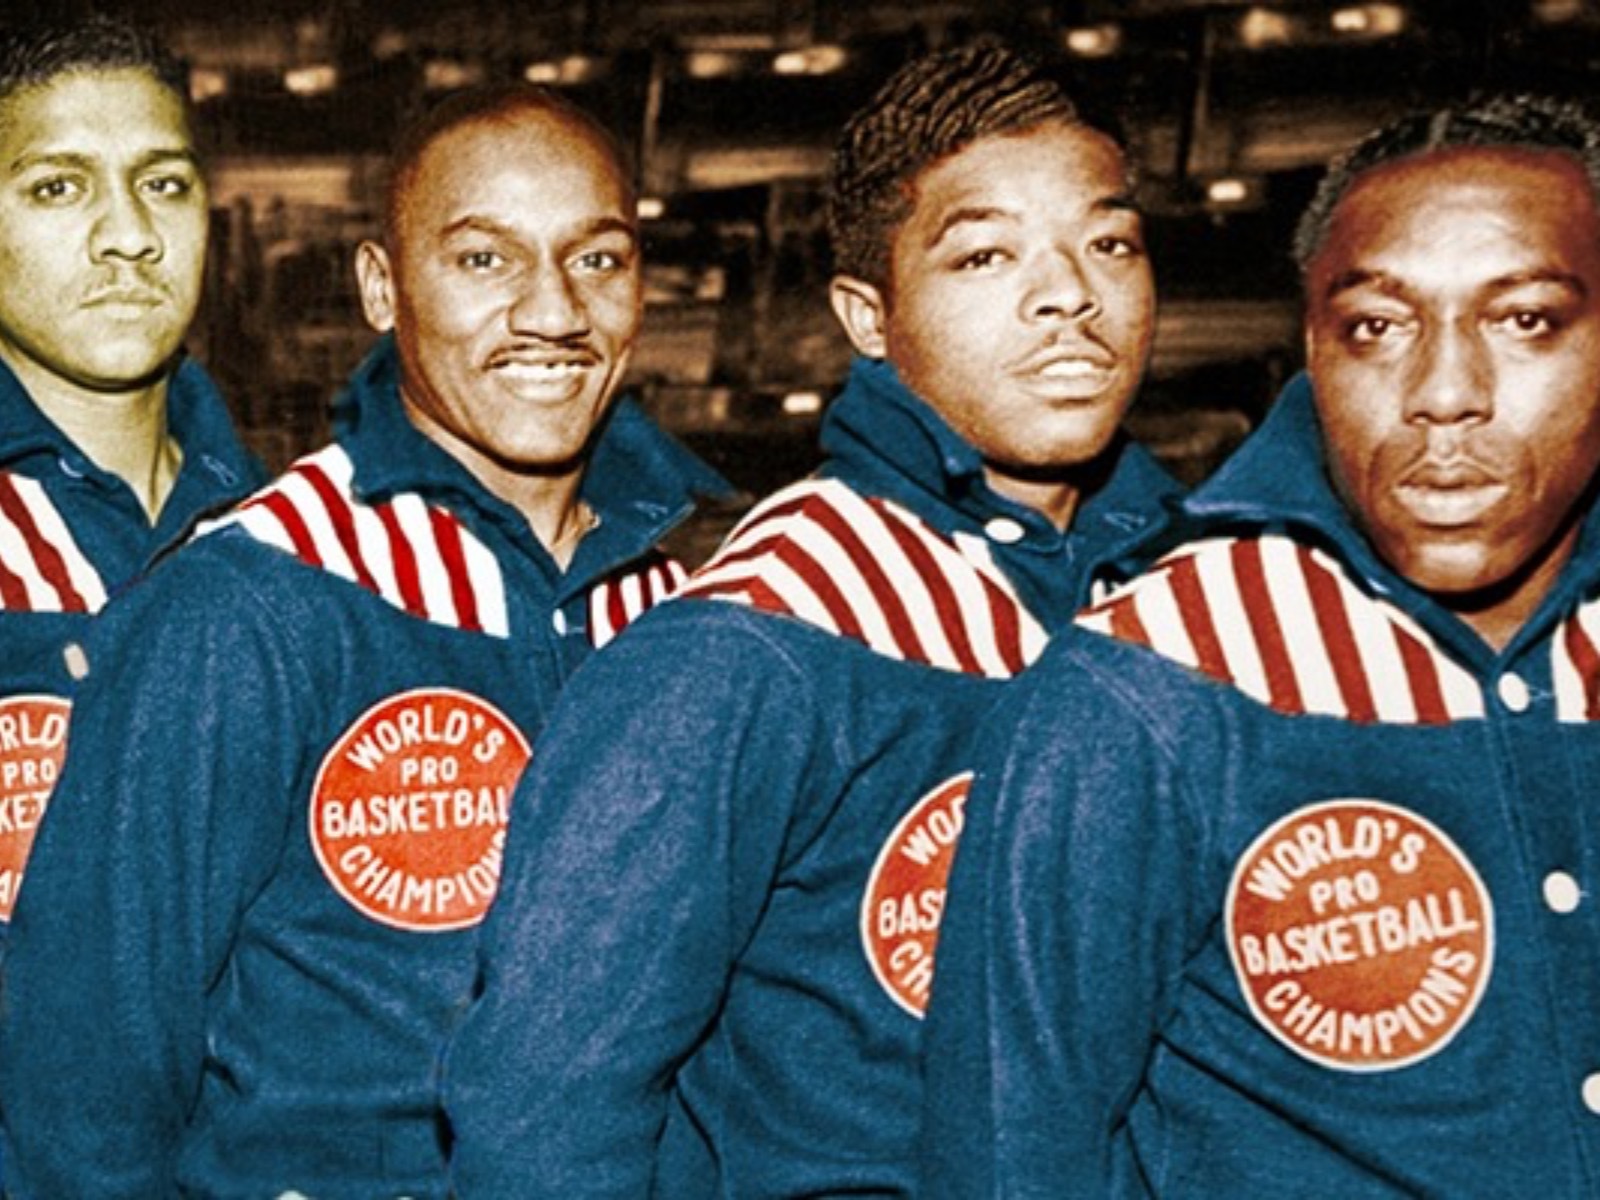 Remembering the Black Fives Era of basketball